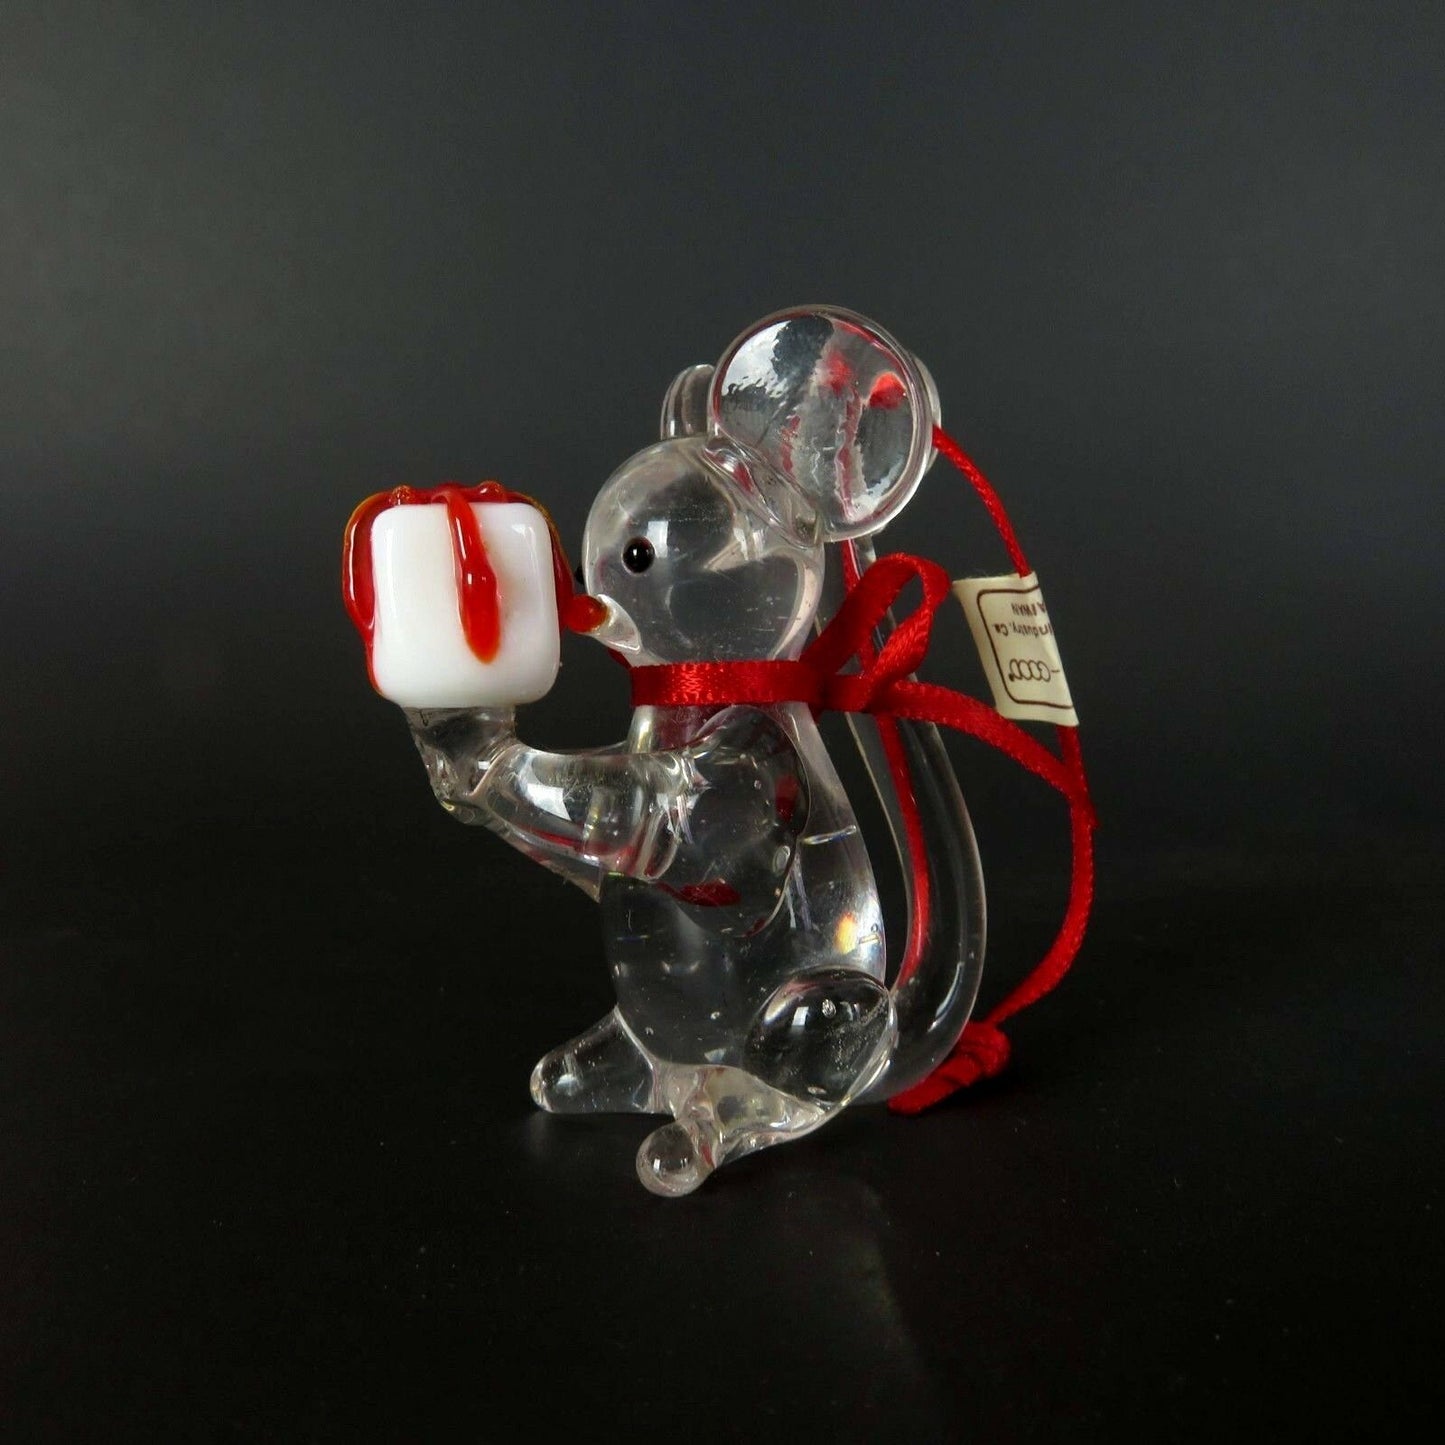 Vintage Mouse Mice Christmas Ornament Glass George Good Present Clear Figurine - At Grandma's Table